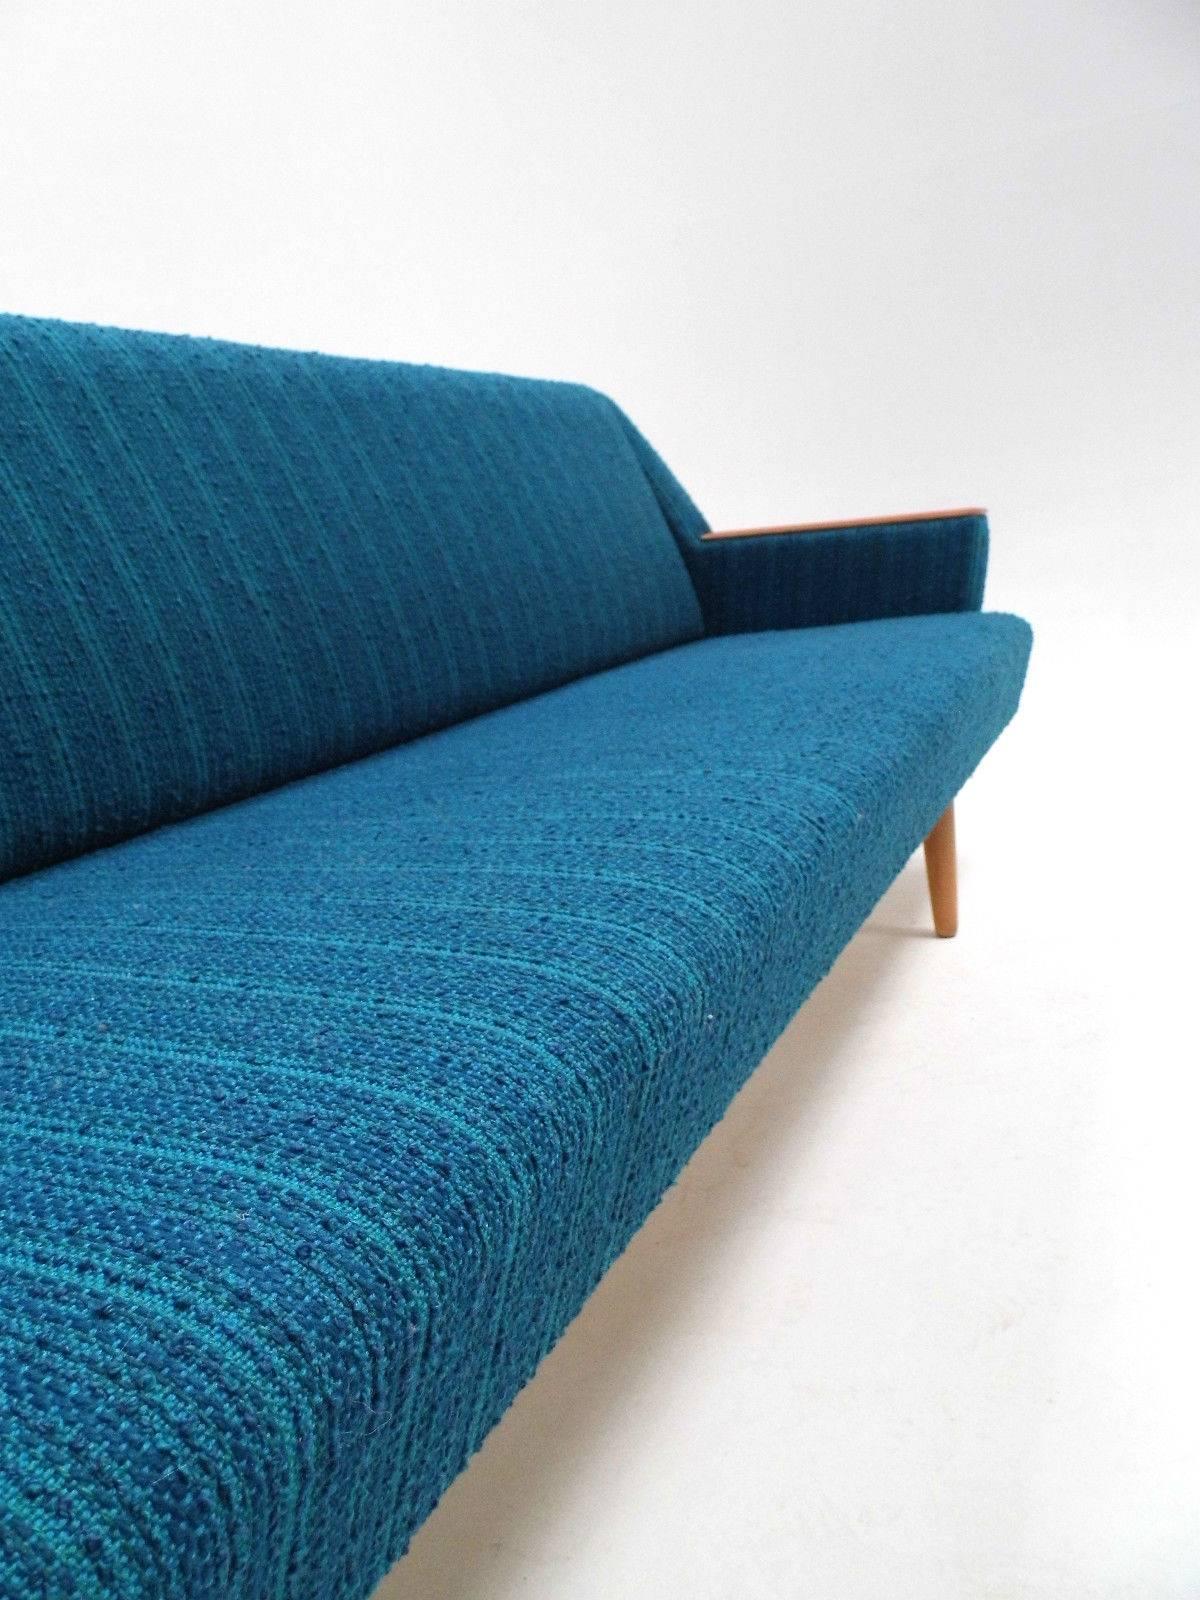 Mid-20th Century Scandinavian Turquoise Blue Wool Teak Four-Seat Sofabed, Midcentury, 1960s